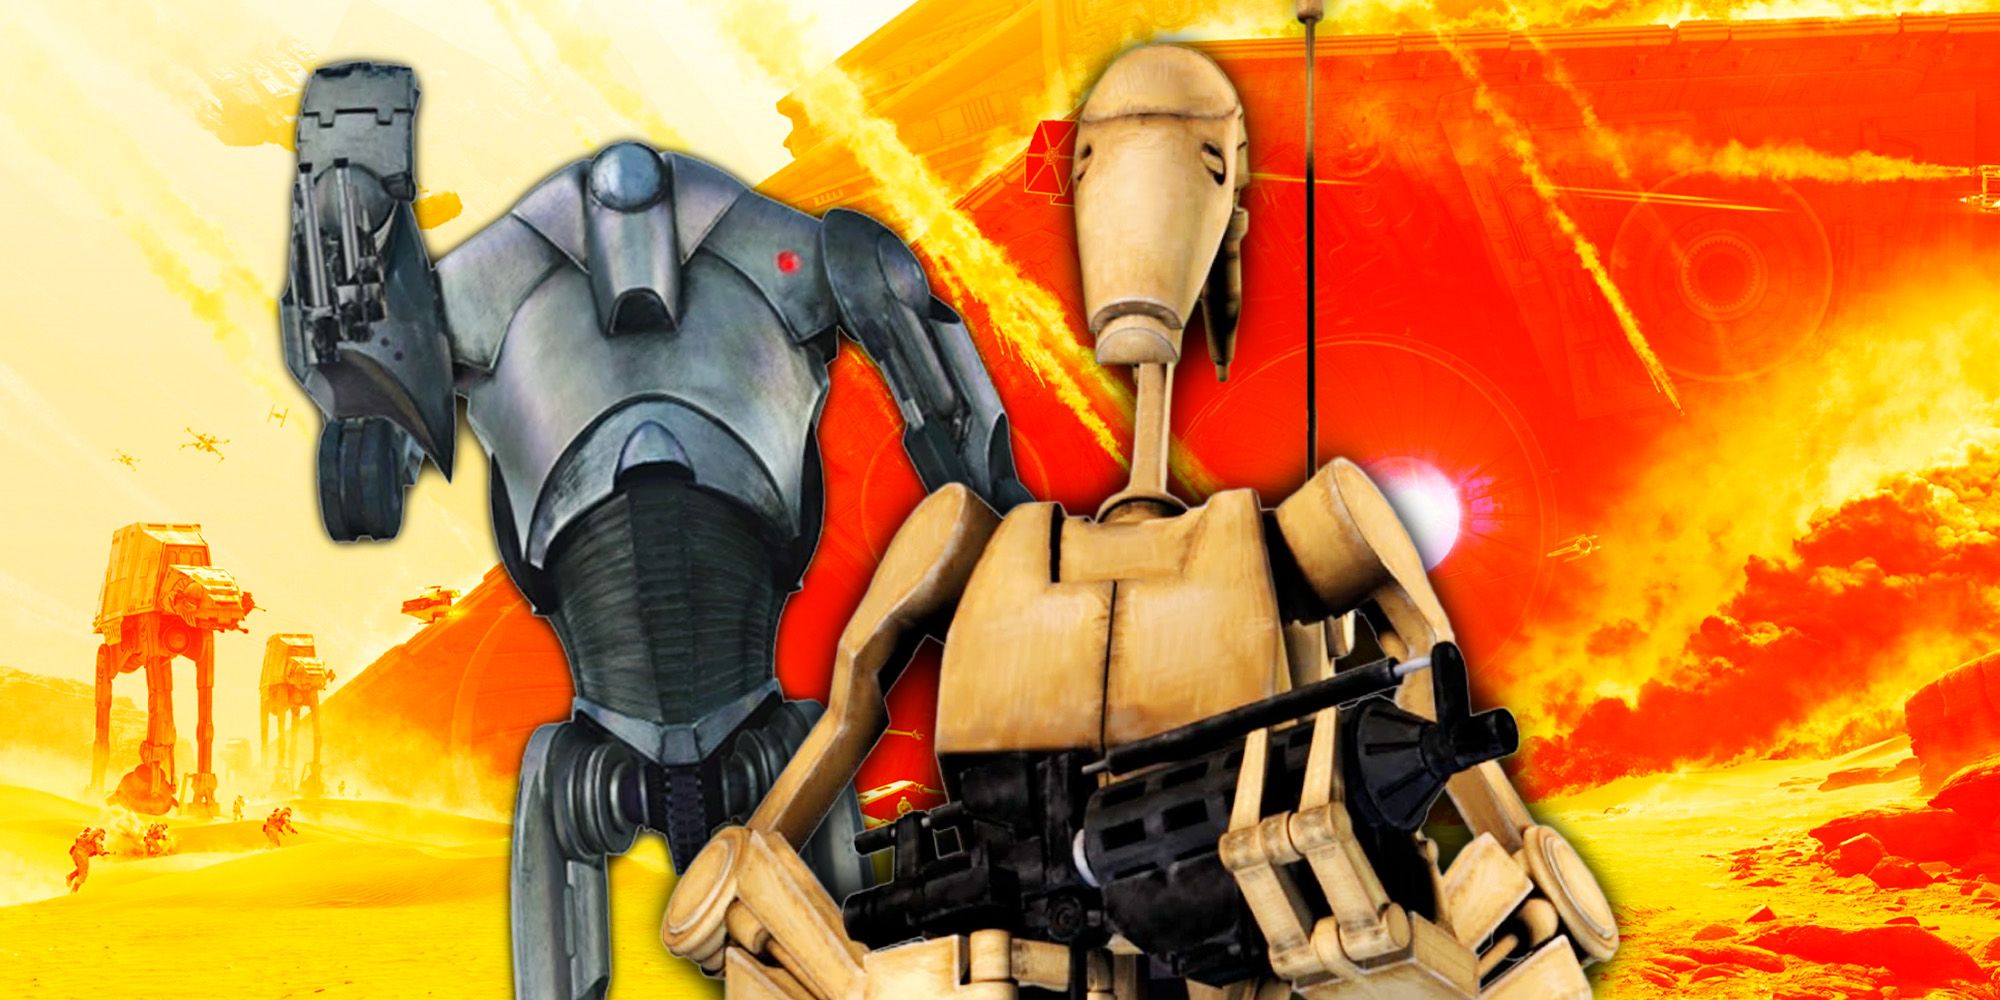 Battle droids from Clone Wars on the battlefront